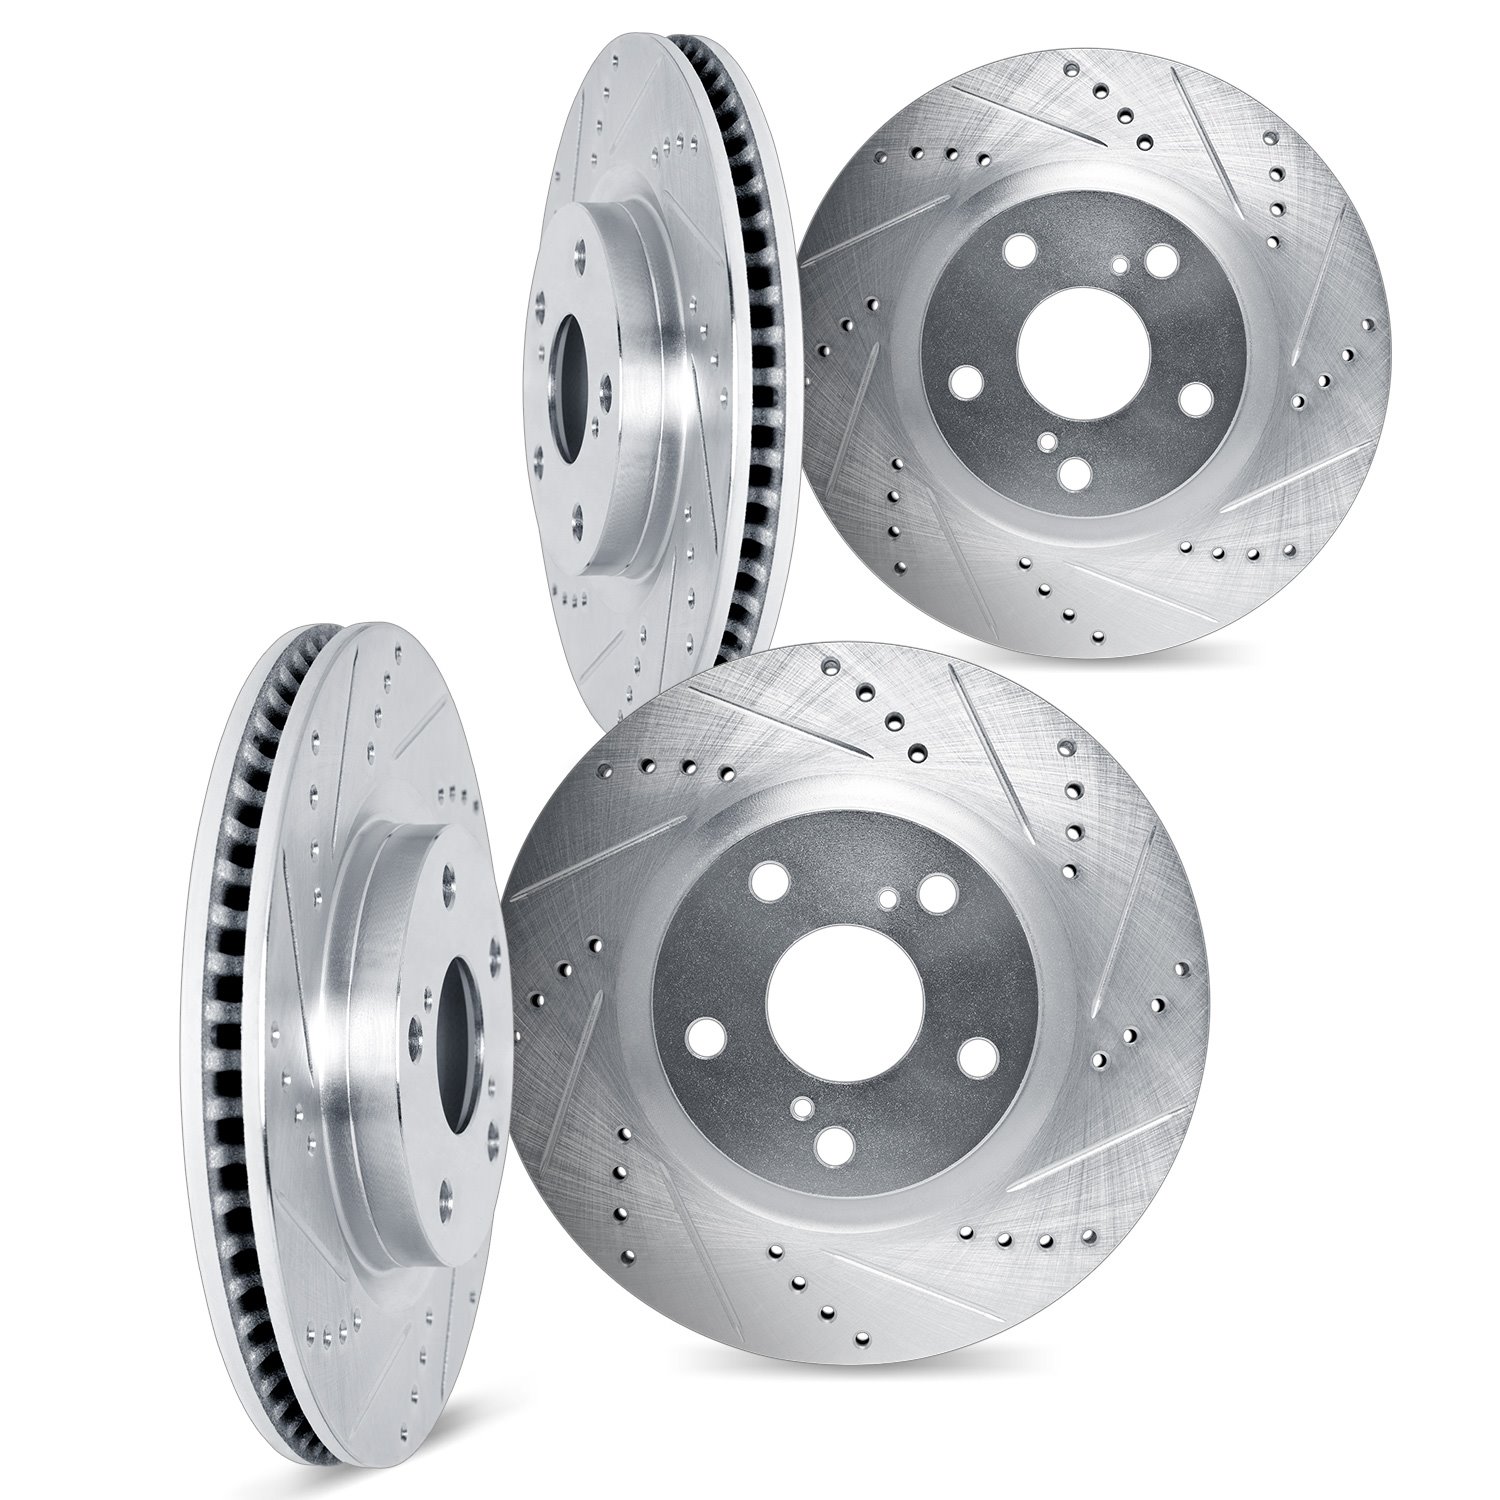 7004-76019 Drilled/Slotted Brake Rotors [Silver], Fits Select Lexus/Toyota/Scion, Position: Front and Rear